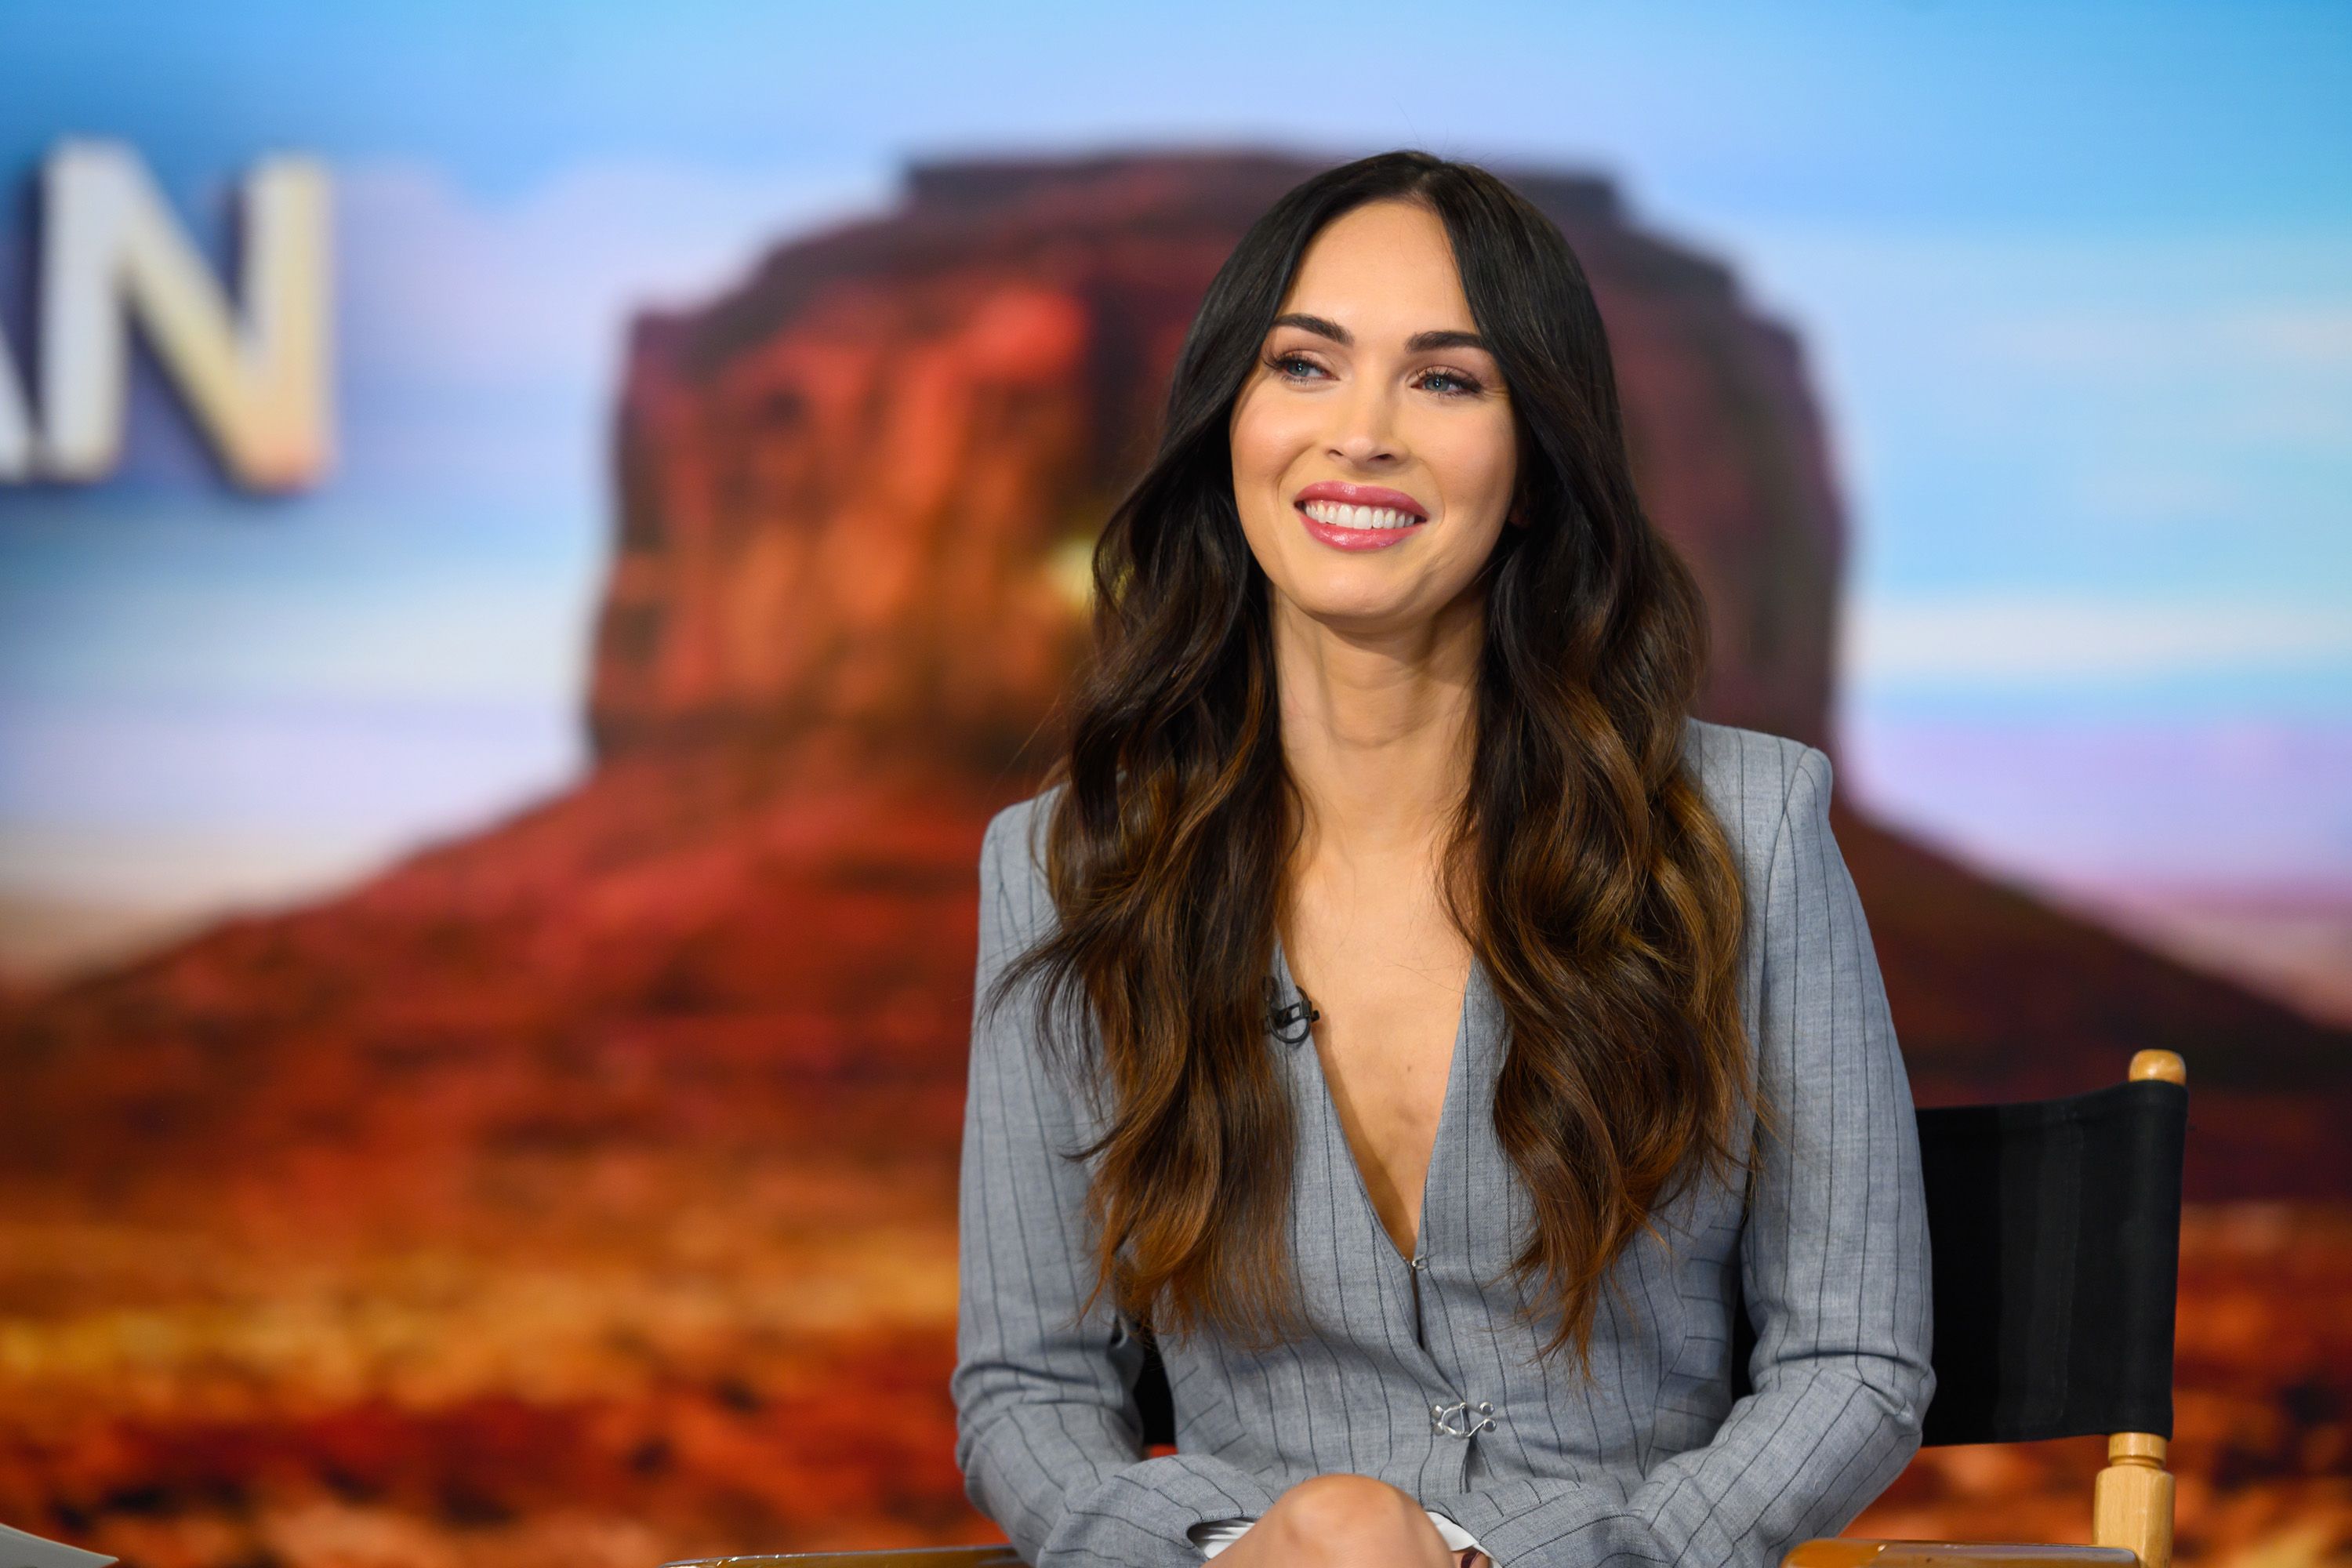 Megan Fox Opened Up About Her Son Noah Wearing Dresses